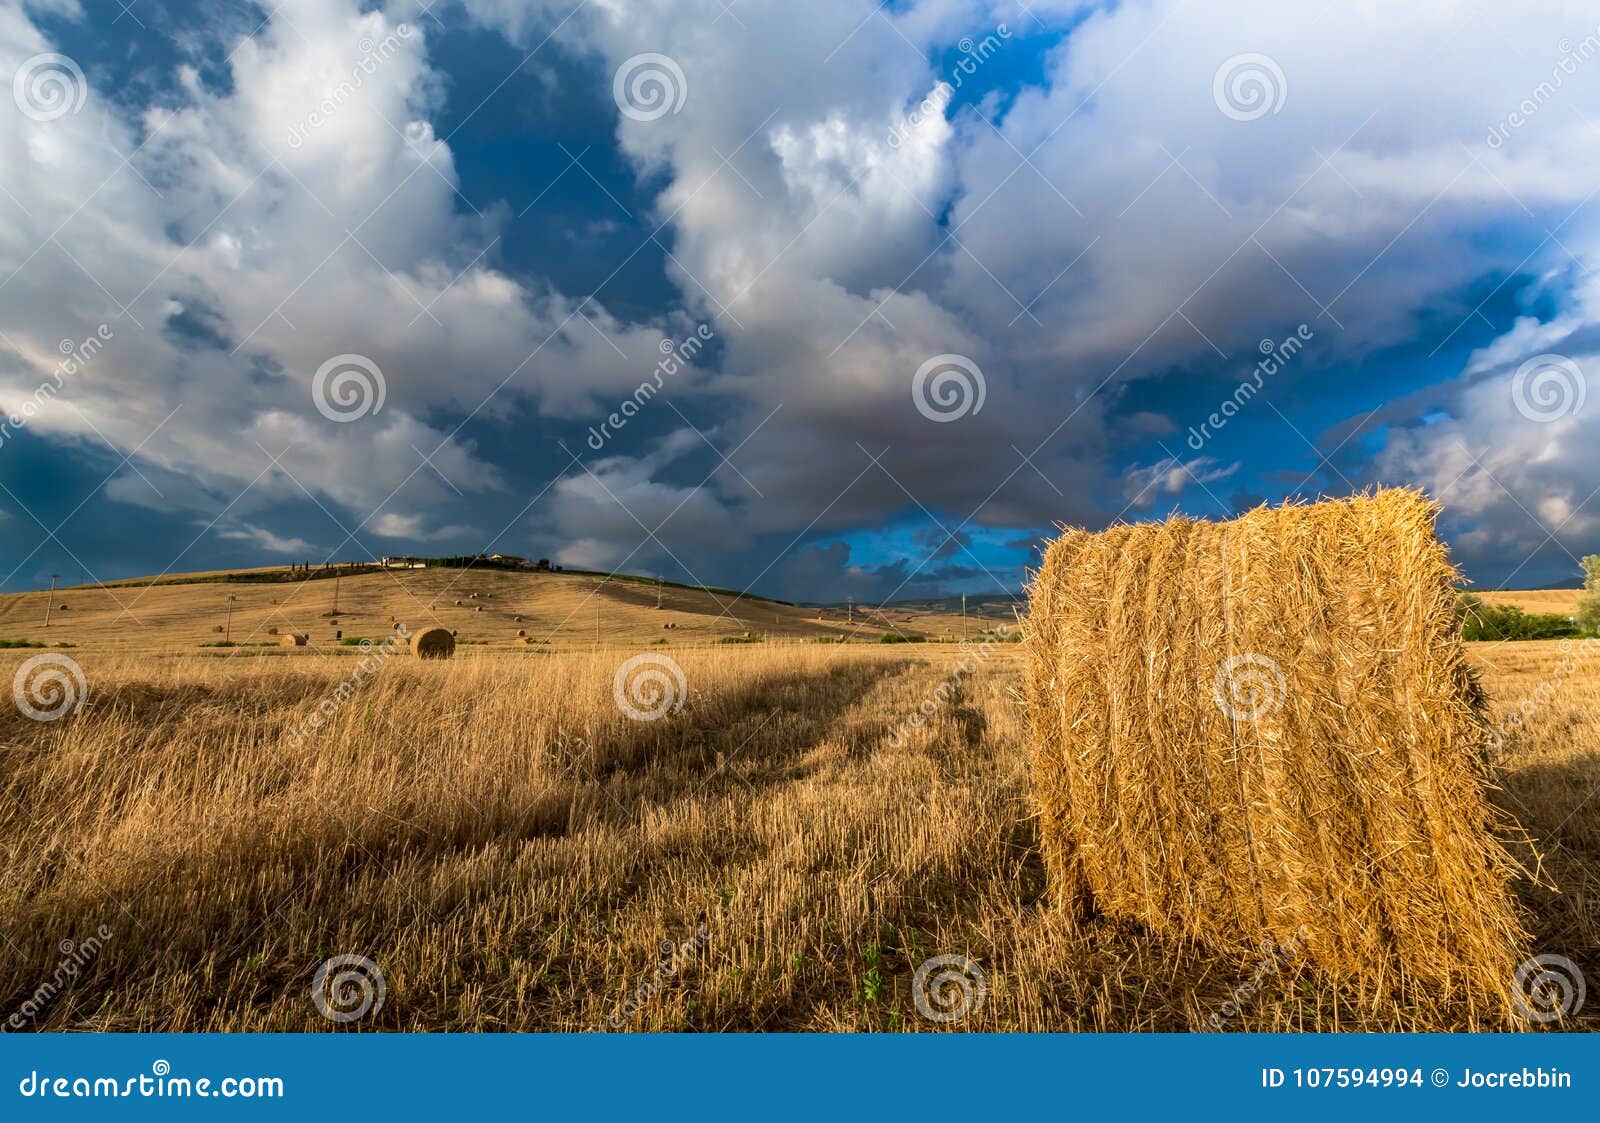 summer storm looms over hay field in tuscany, italy.cr2